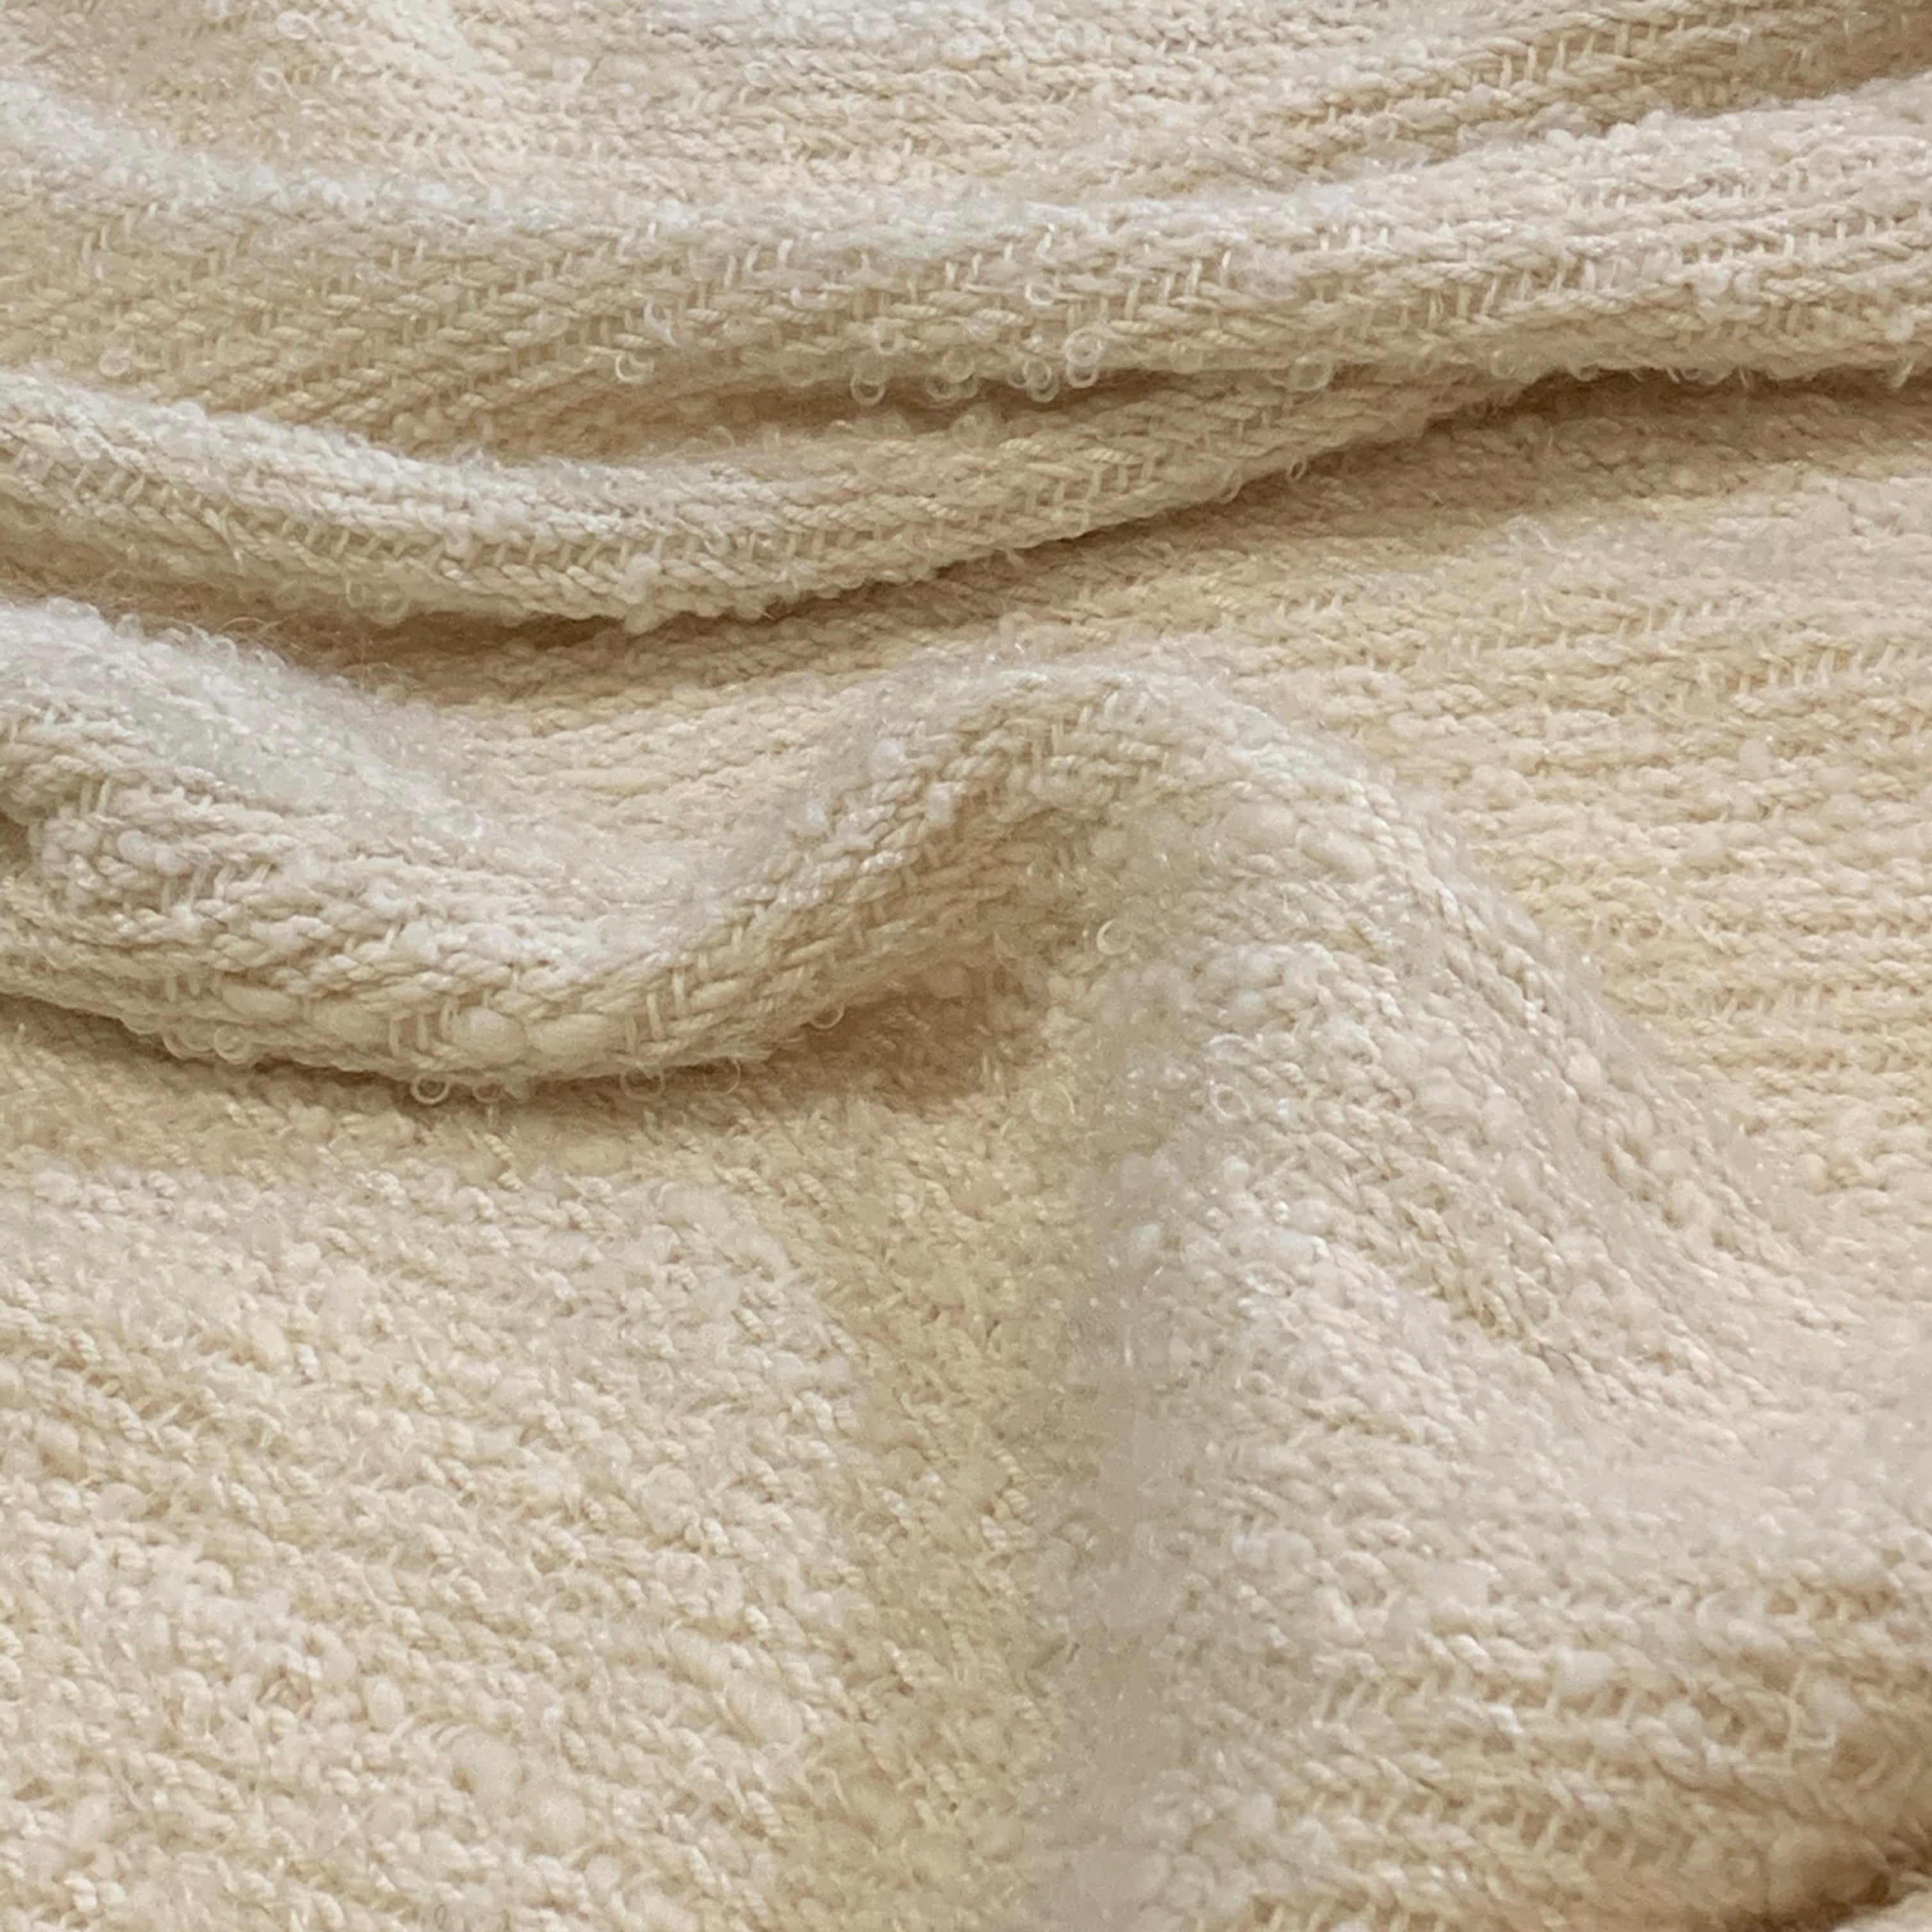 Lap Blanket (Natural Whites, with Textural Accents)